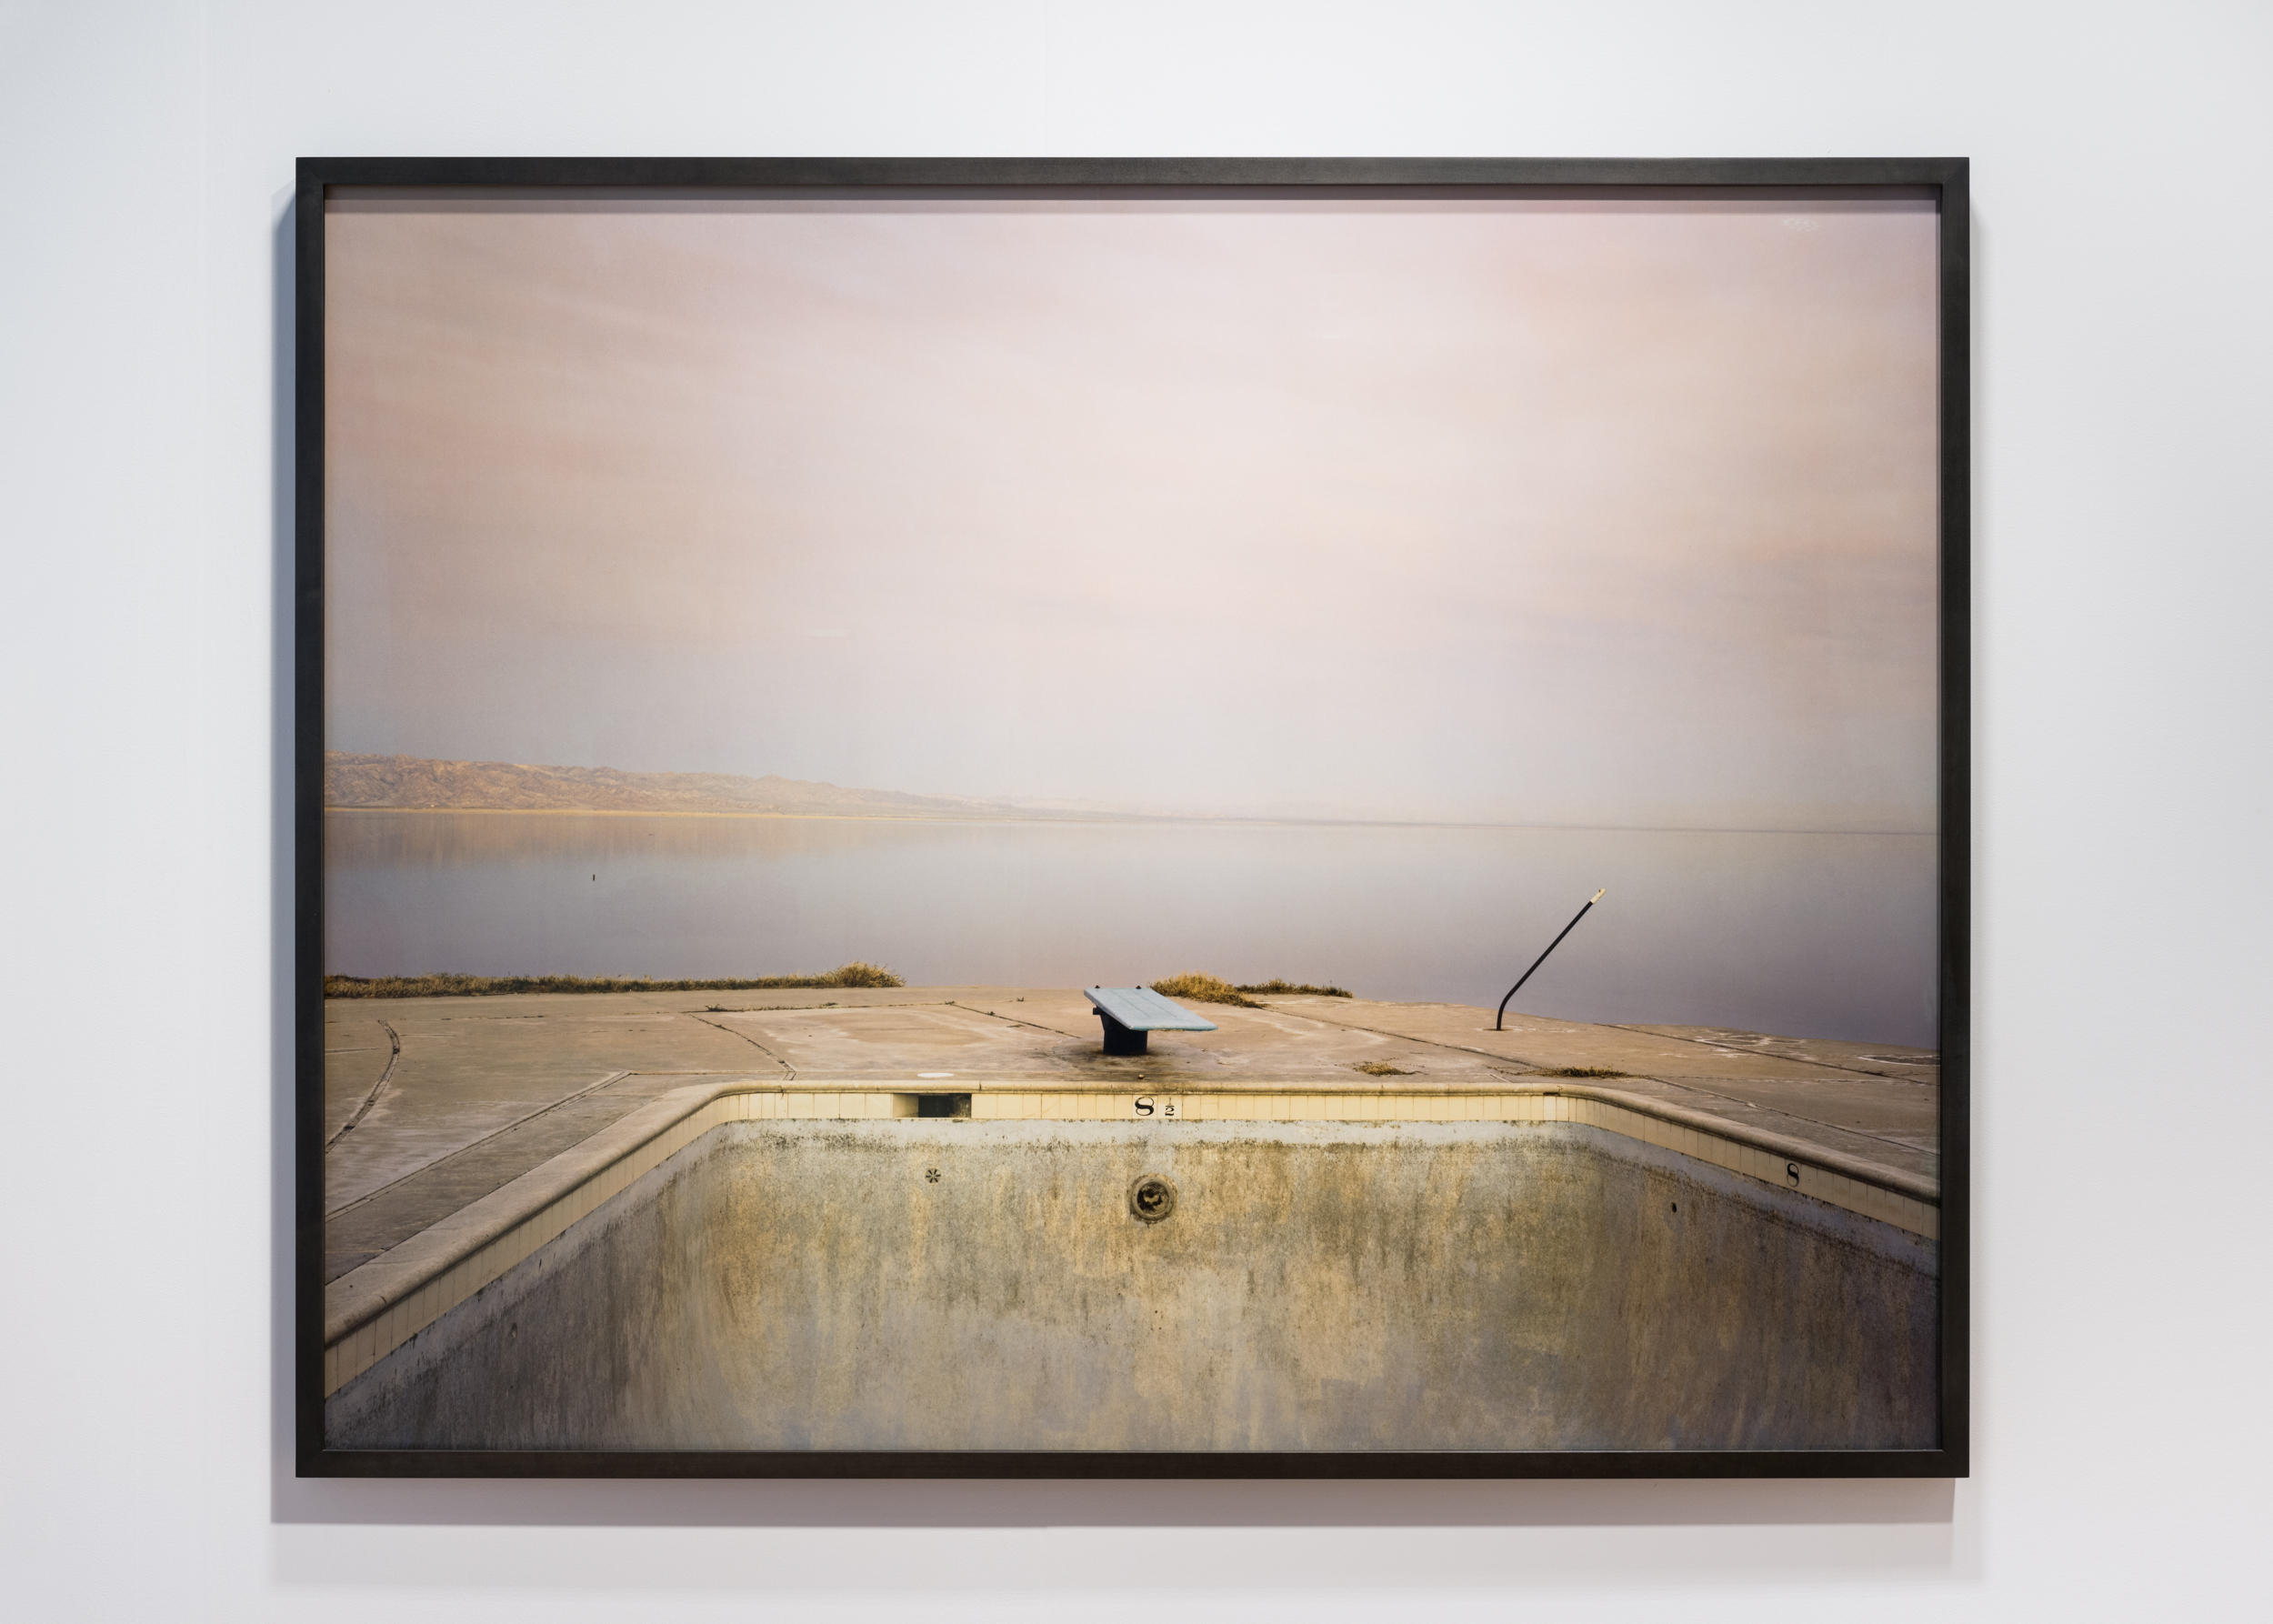 Color image of a color photograph depicting an empty swimming pool against a body of water framed in black on a white wall